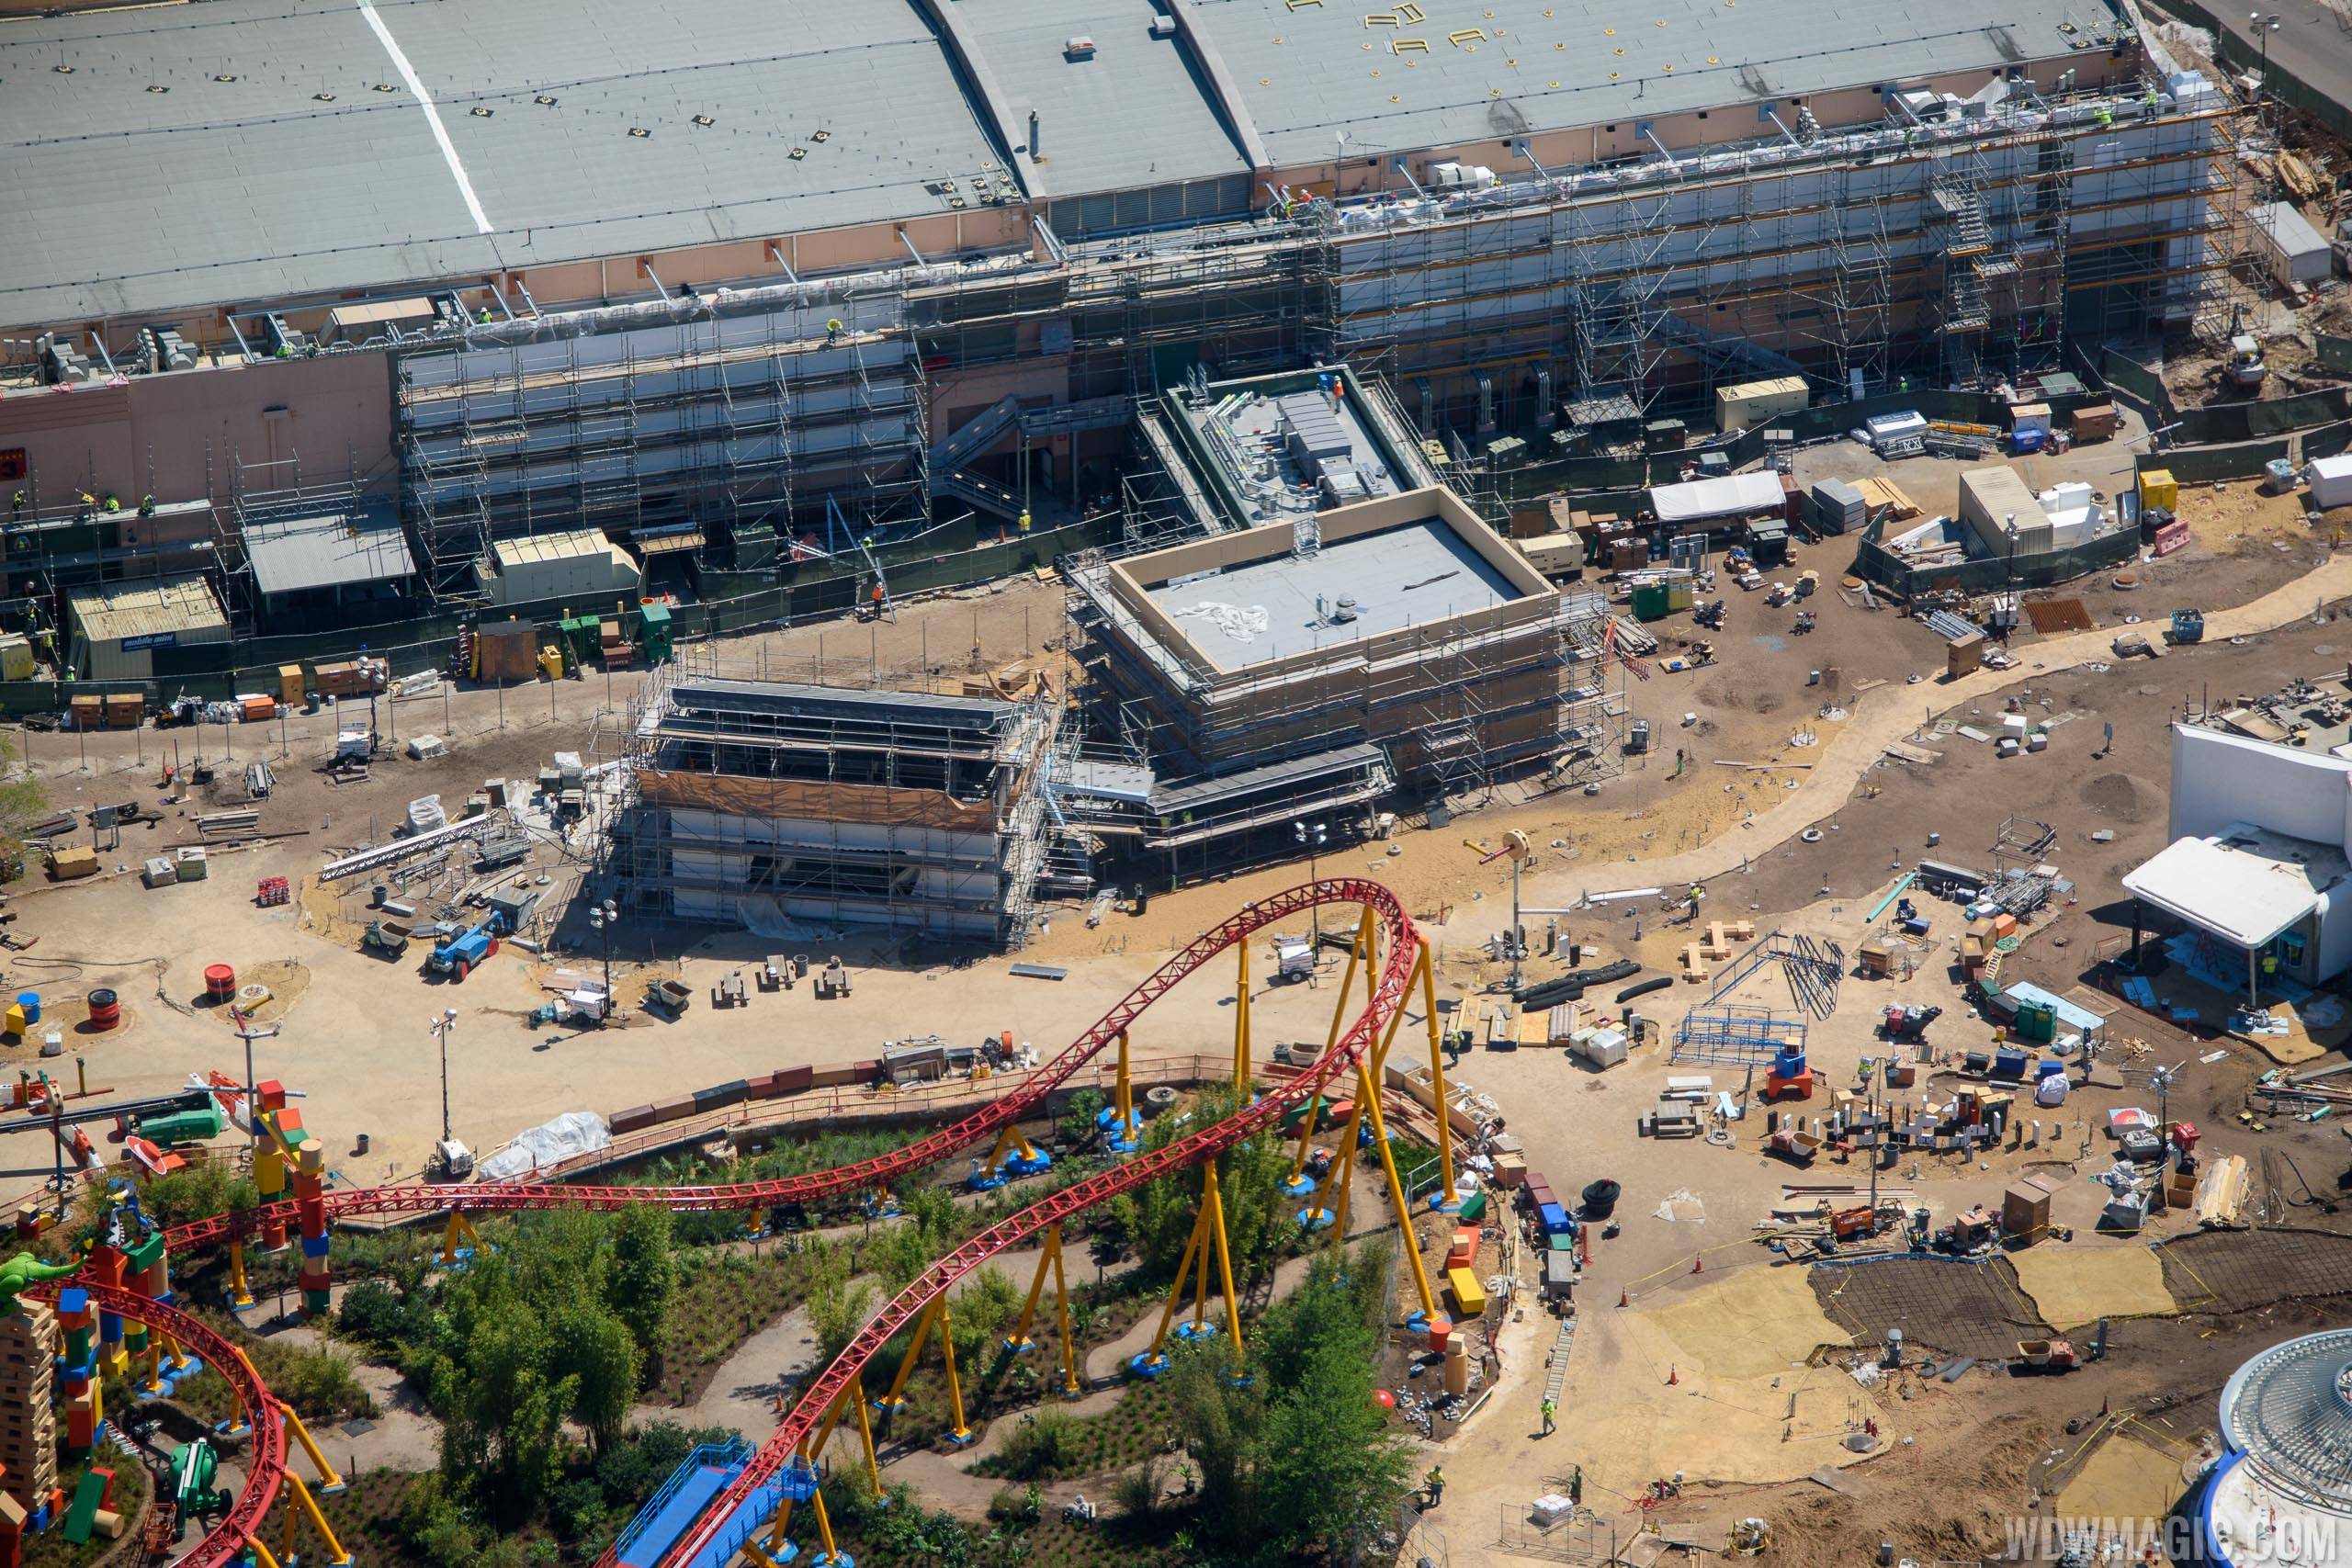 The new entrance to Toy Story Mania will be at the rear of the current building